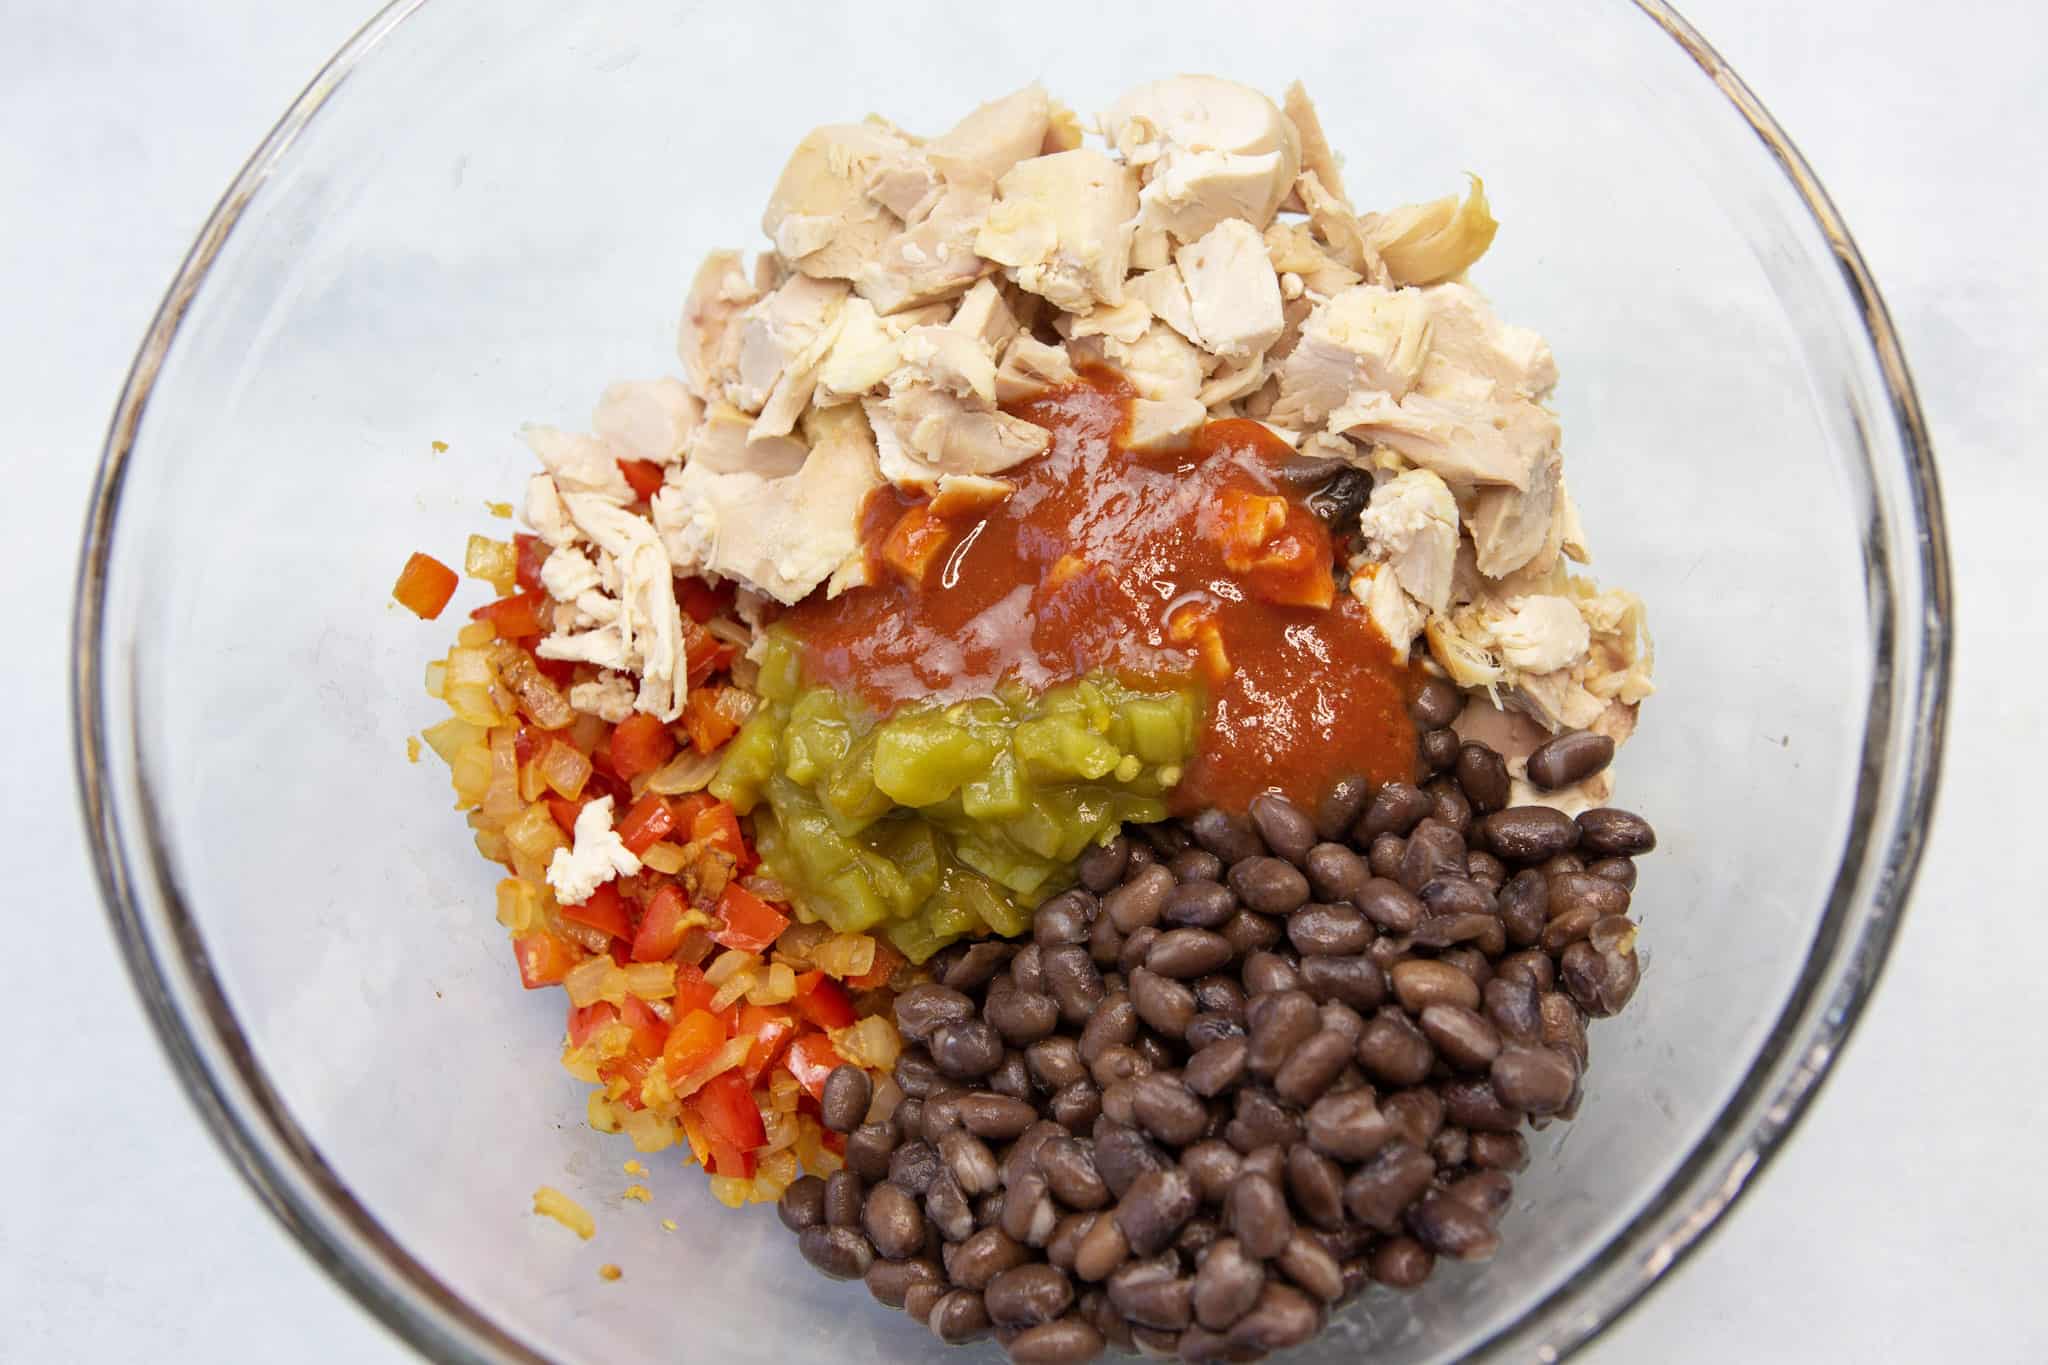 All natural easy chicken enchilada filling ingredients in a mixing bowl.